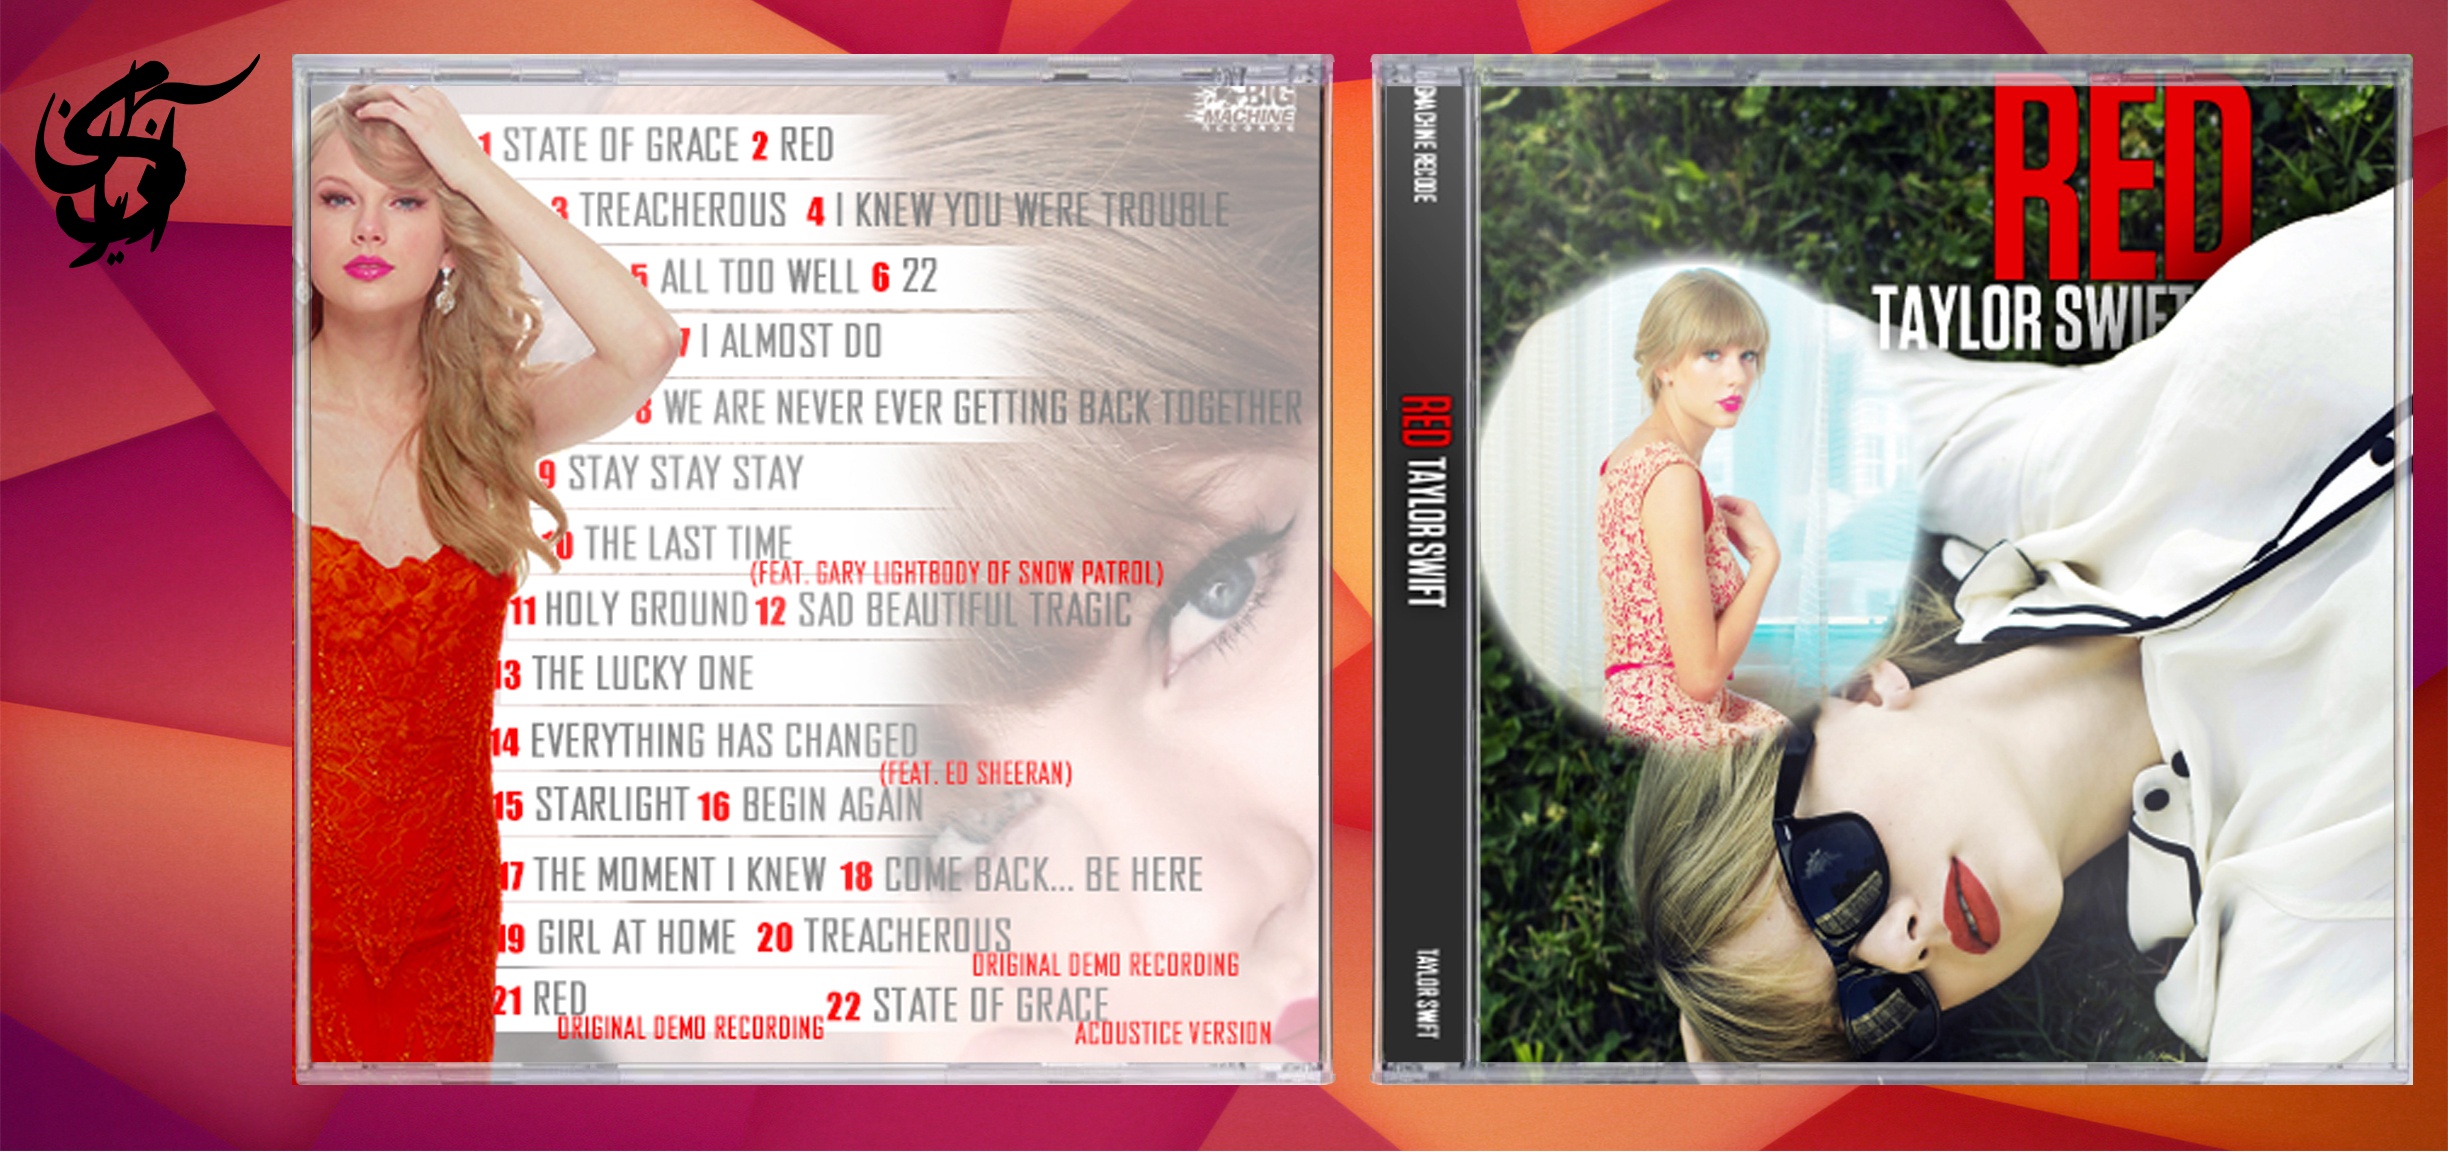 Taylor Swift : RED (Deluxe) box cover